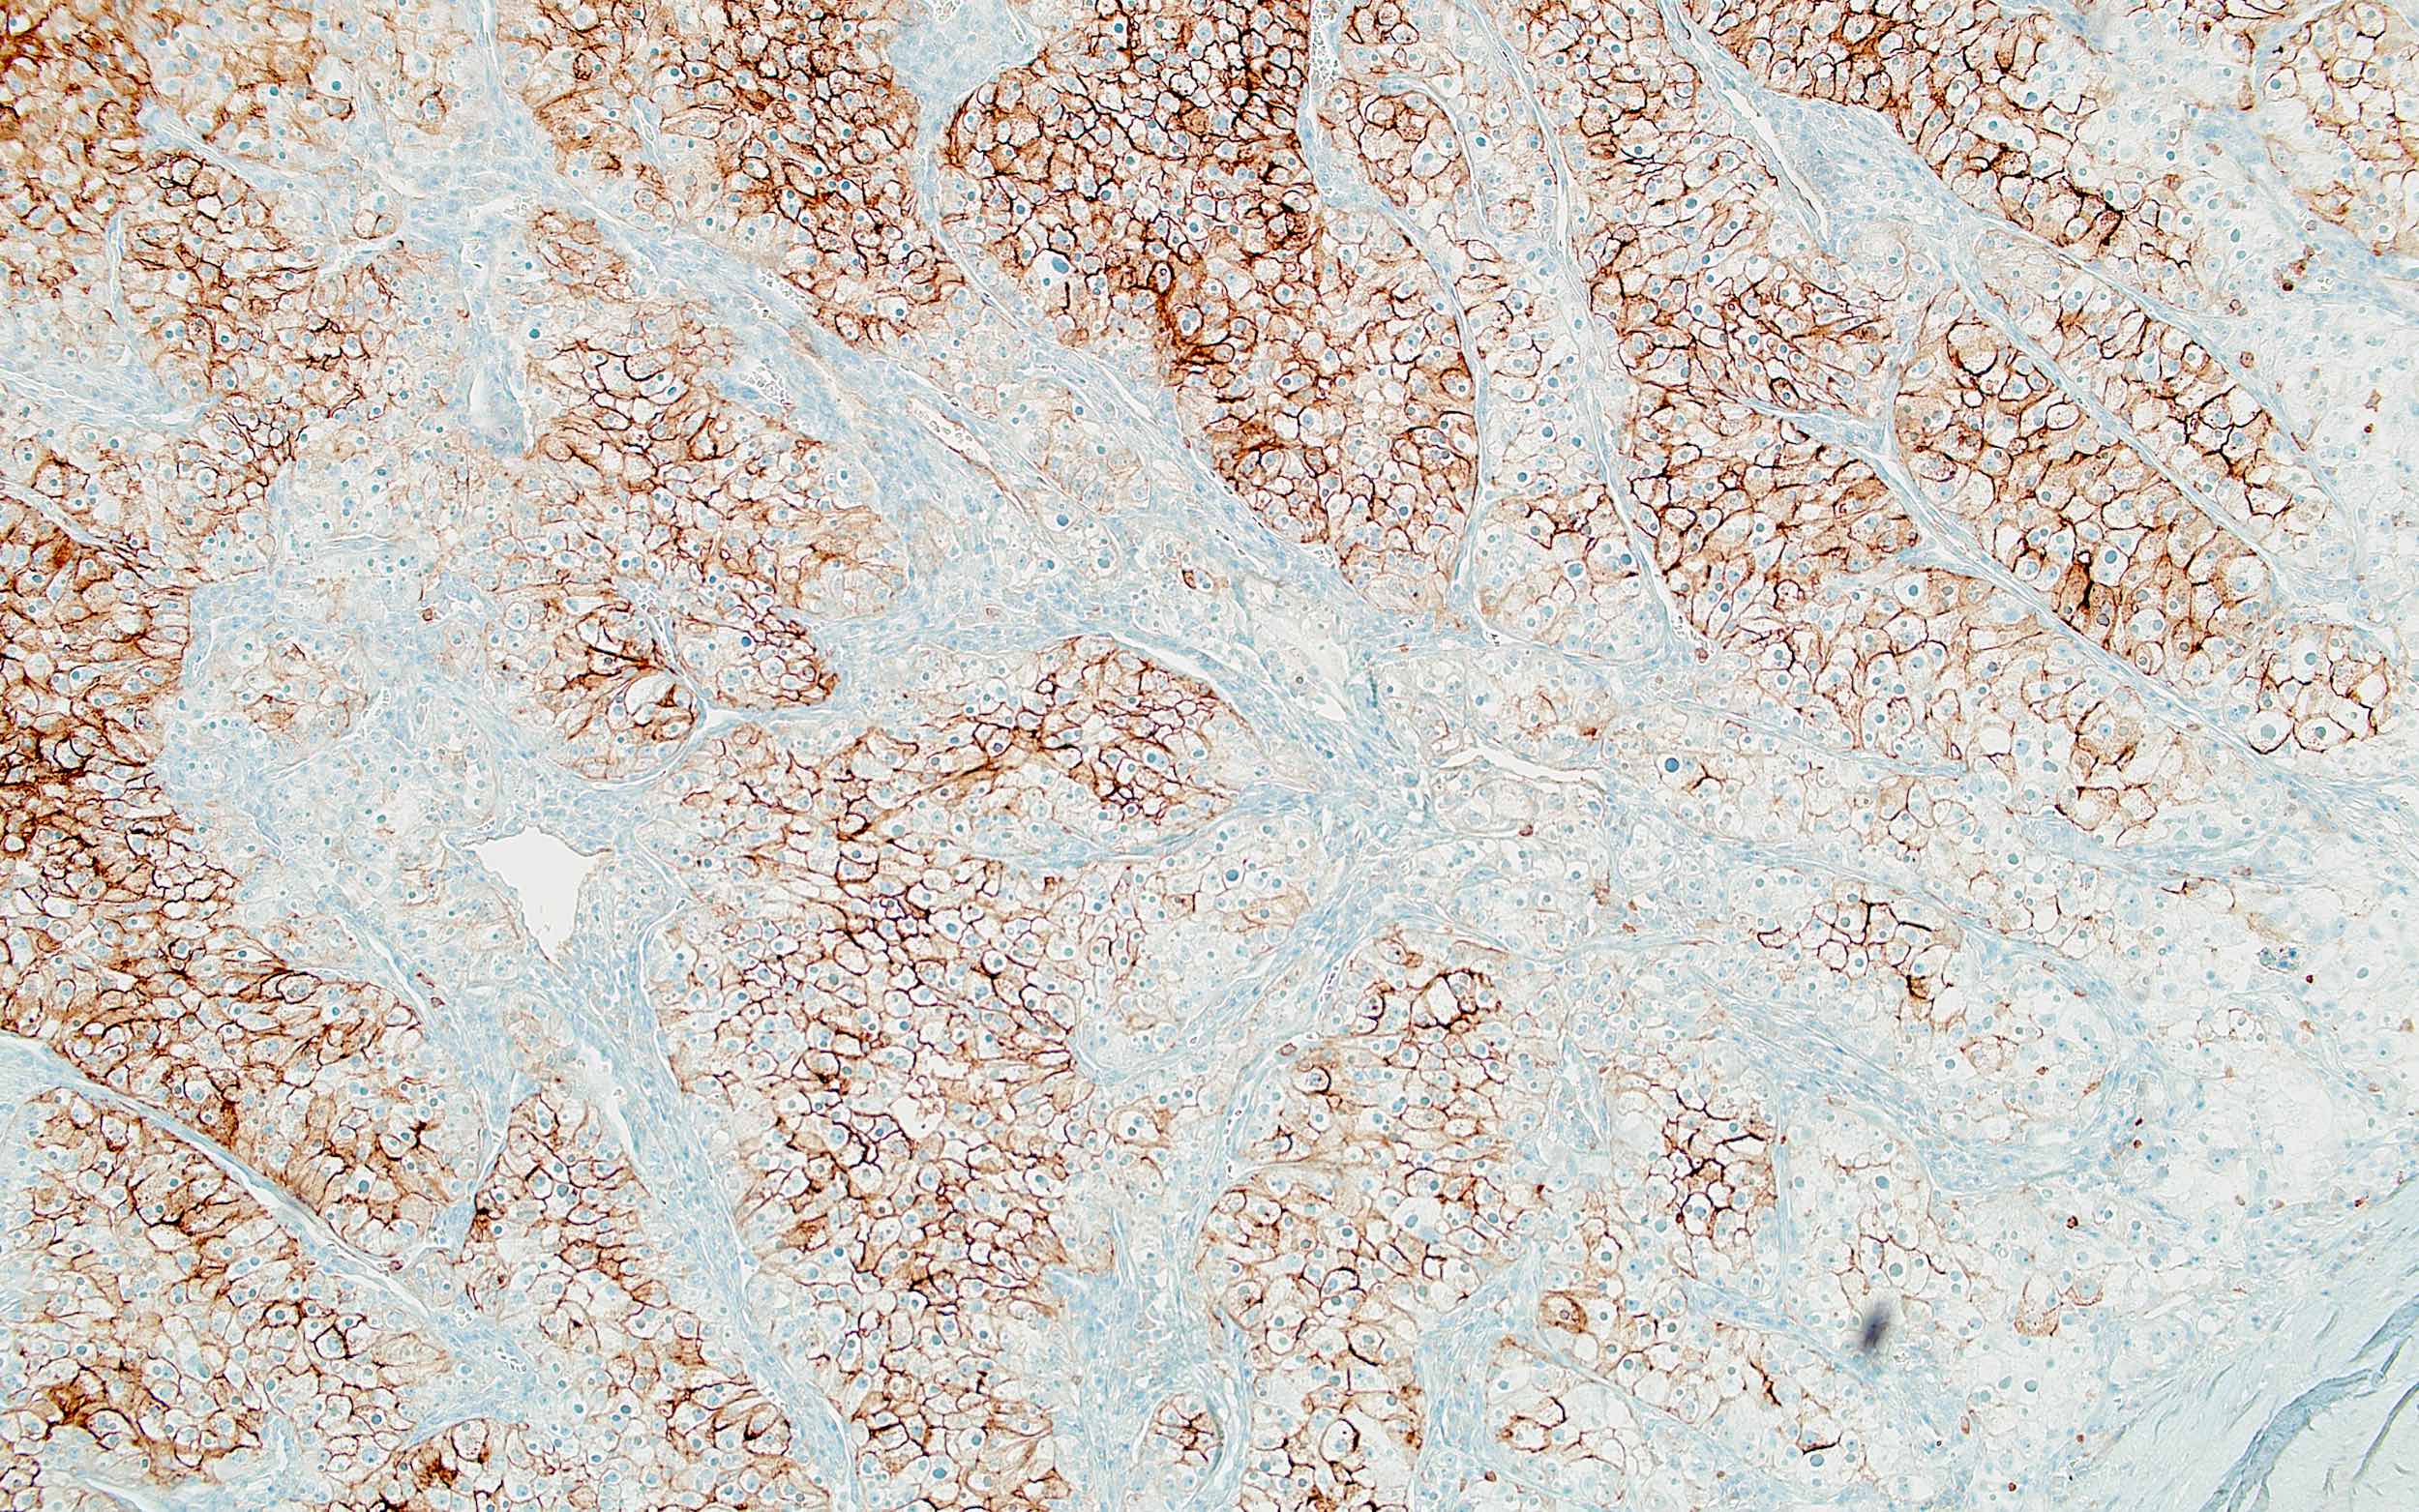 Atypical cells of CCRCC, CD10+